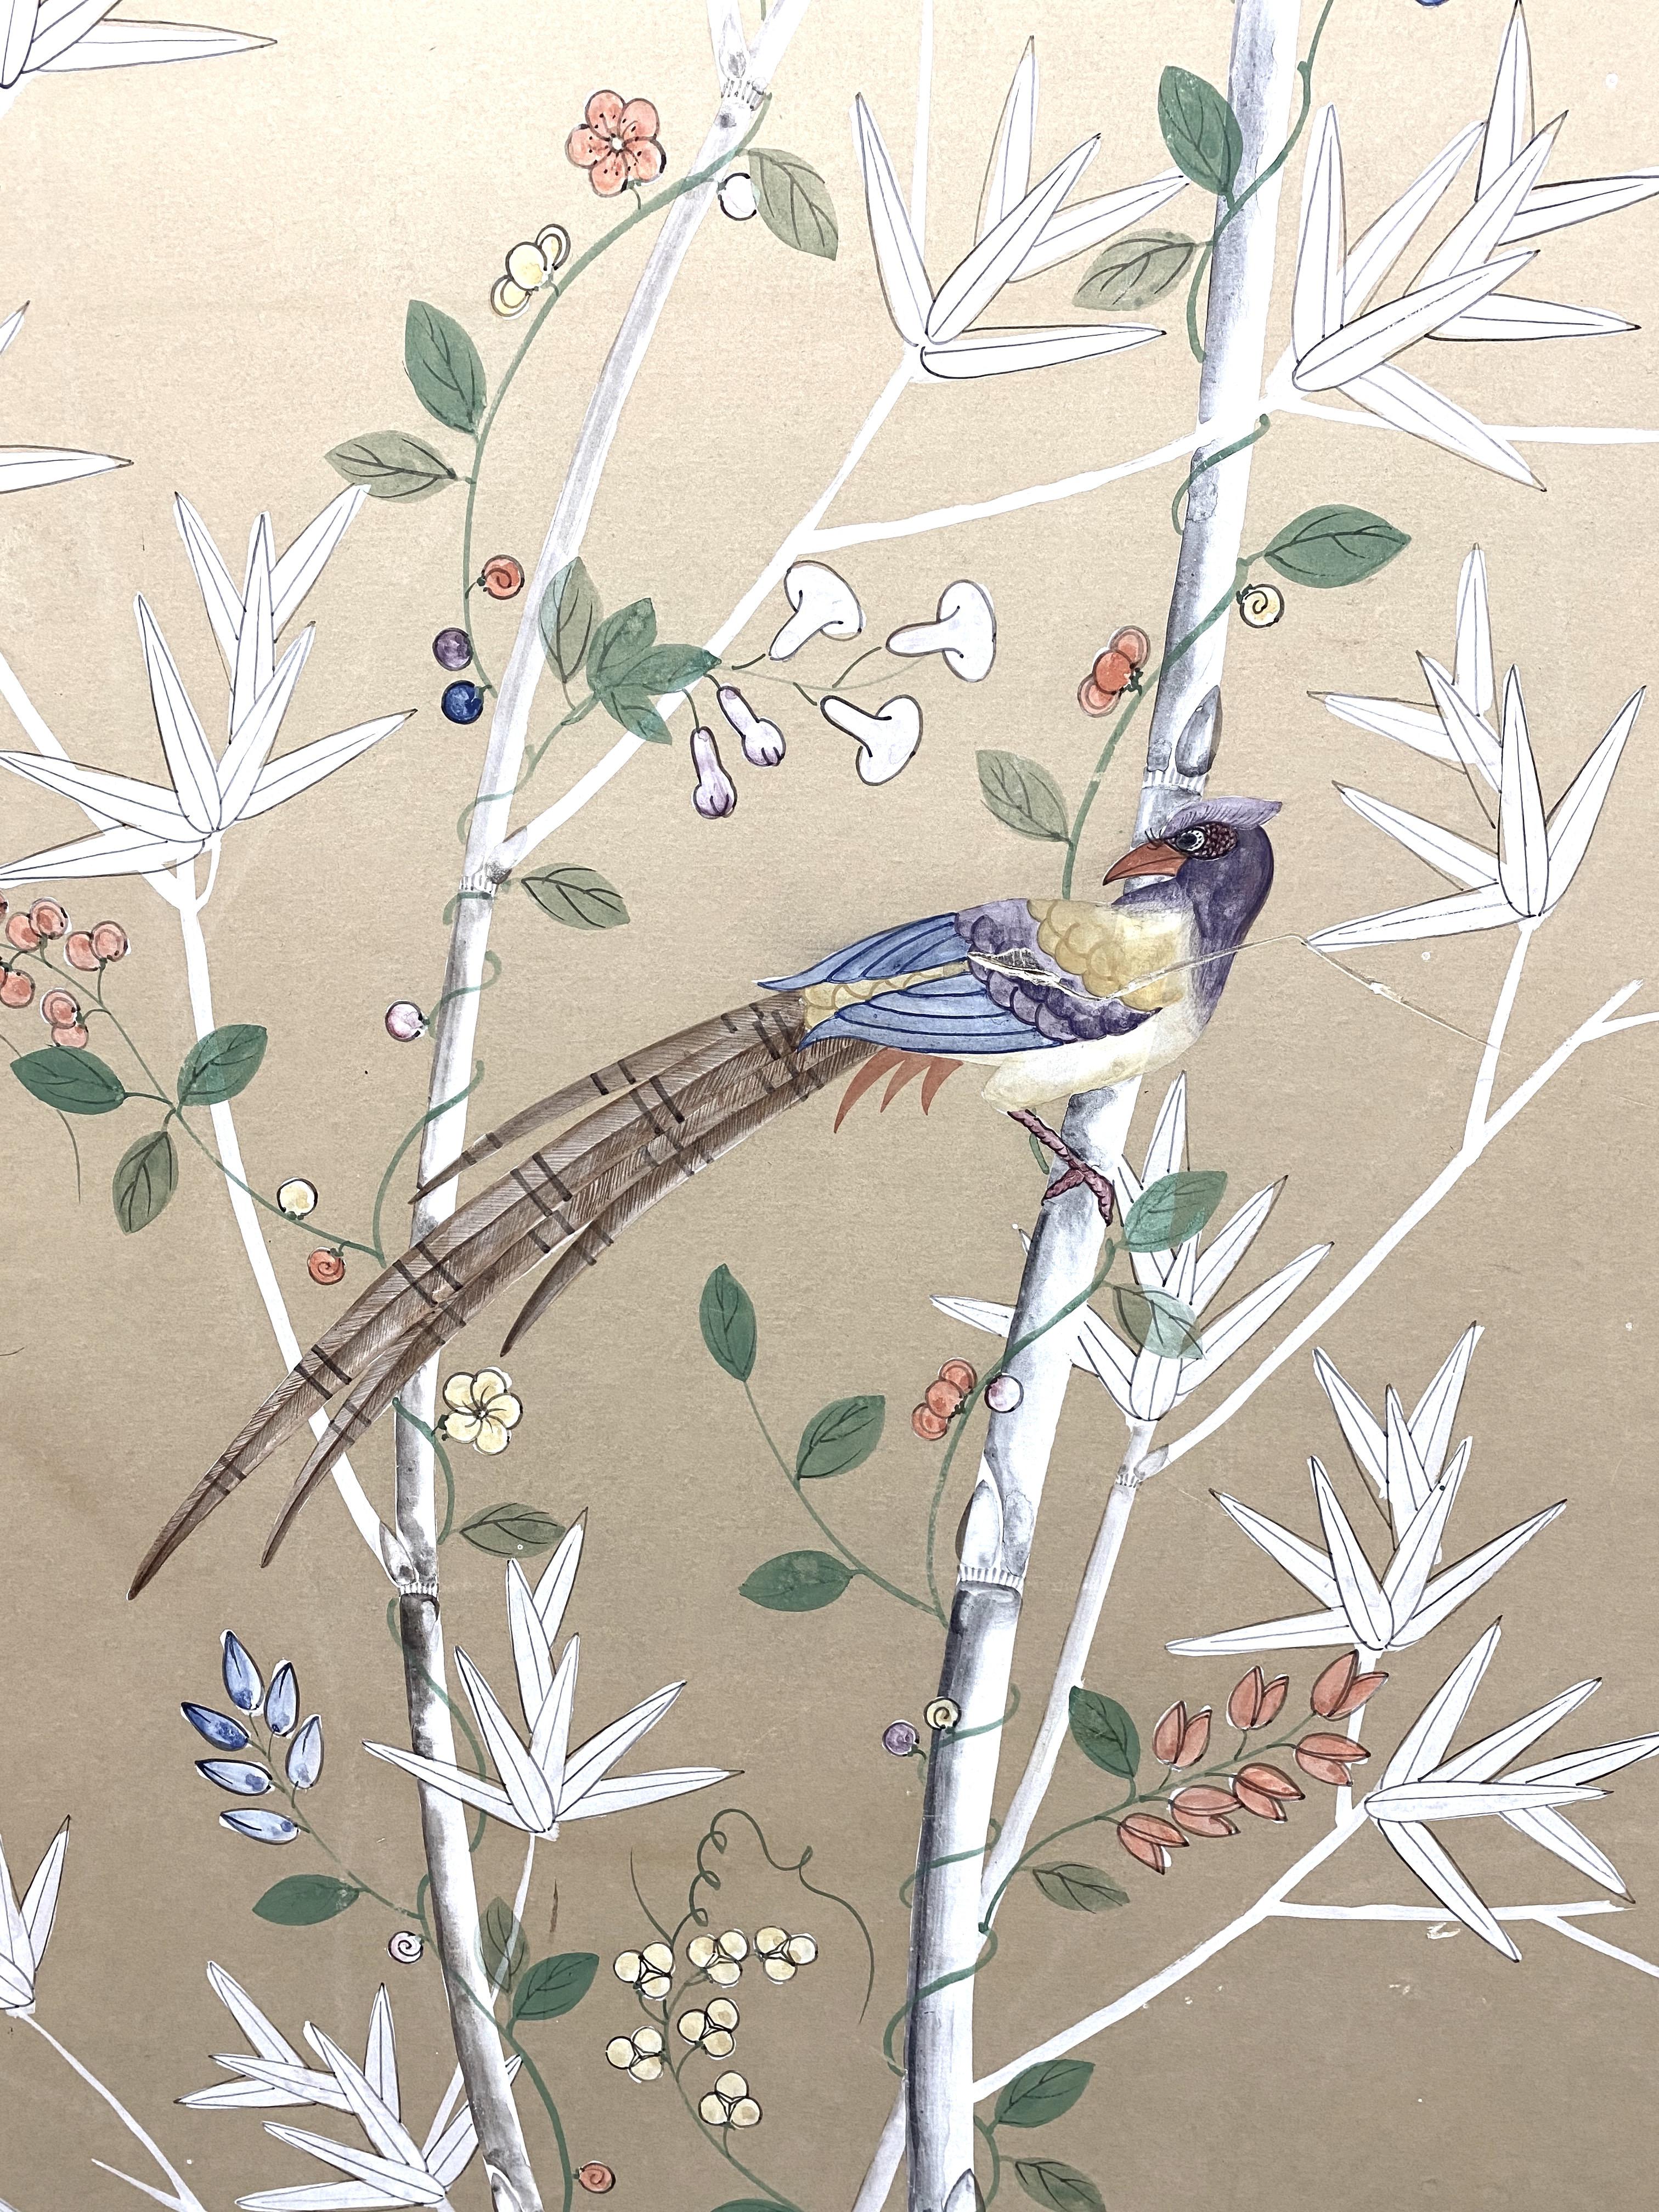 Gracie handpainted silk wallpaper panel with goldleaf frame. This is one of 2 vintage panels that can be used together to create a chic interior backround. The Chinoiserie pattern with cream backround, white bamboo branches and a hand painted bird